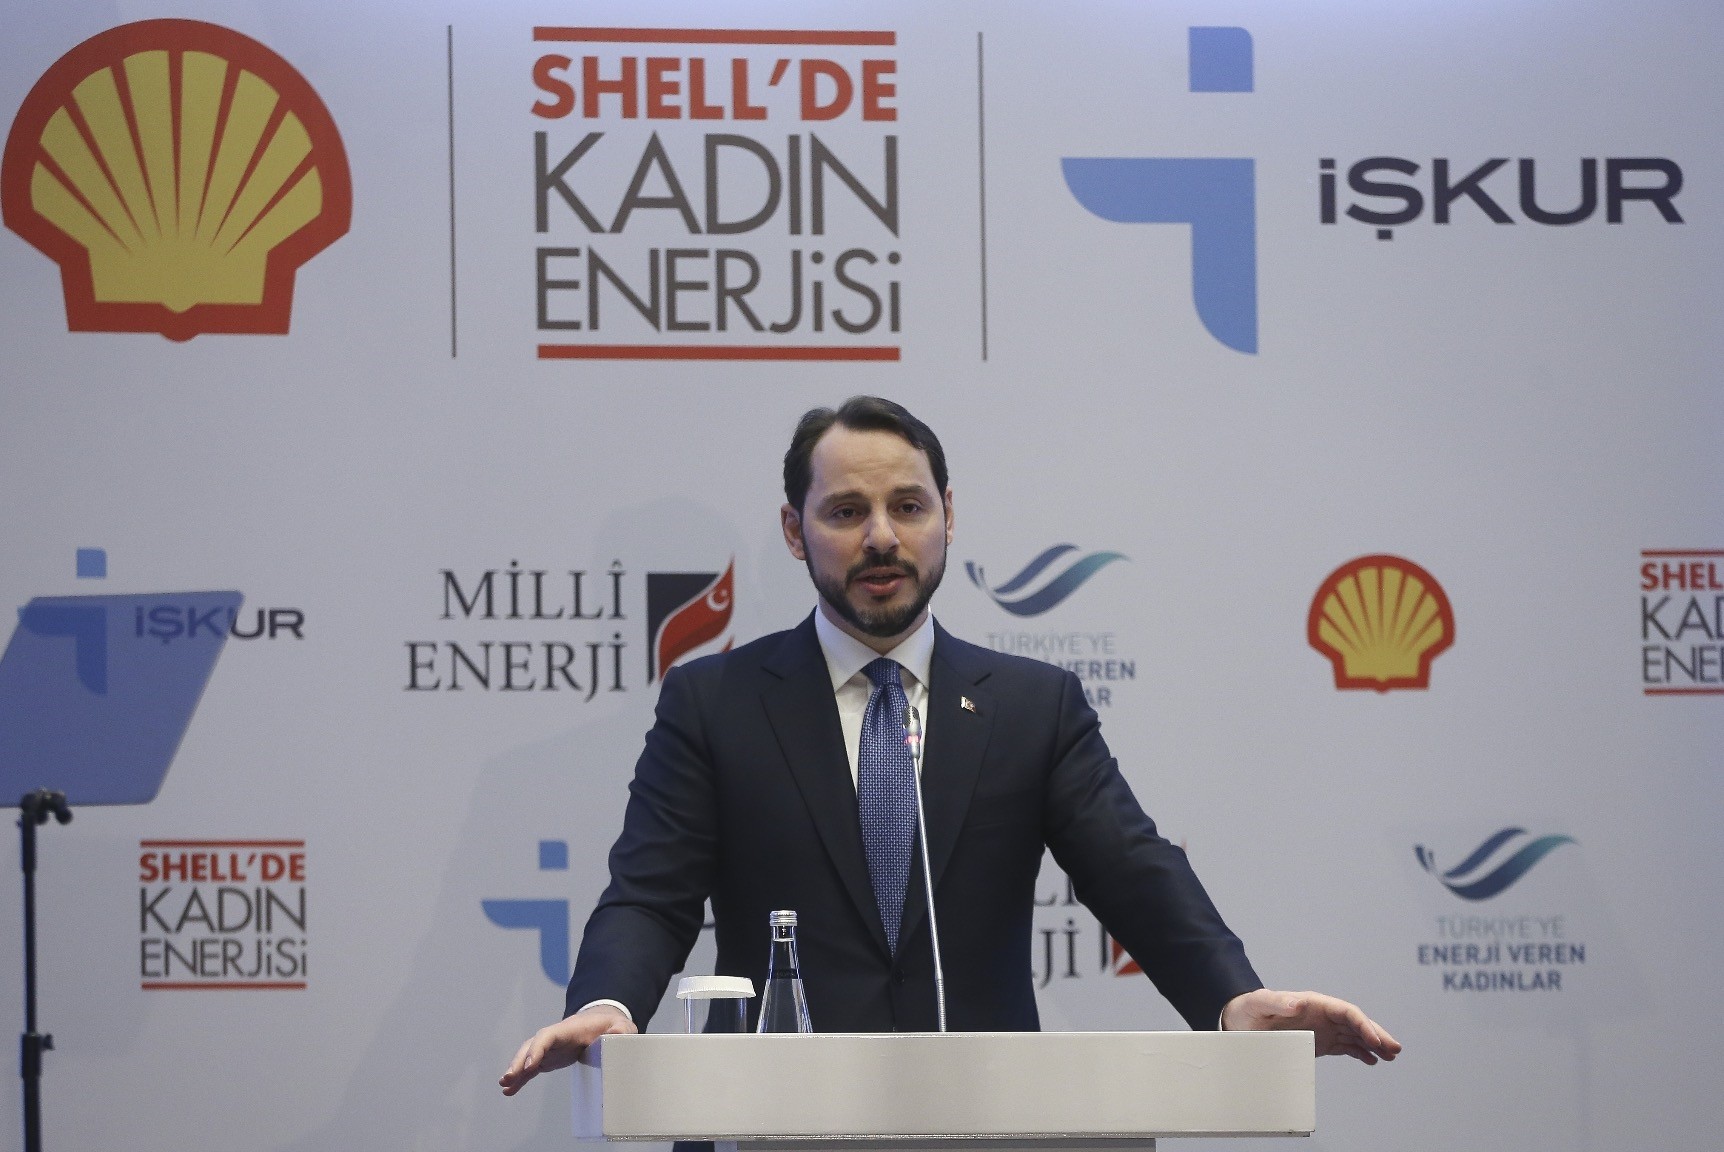 Albayrak delivers a speech at a meeting of Employment for 5,000 Women in 5 Years project, which was held jointly by Shell Turkey and u0130u015eKUR under the auspices of the Energy & Natural Resources Ministry and Labor and Social Security Ministry, March 9.